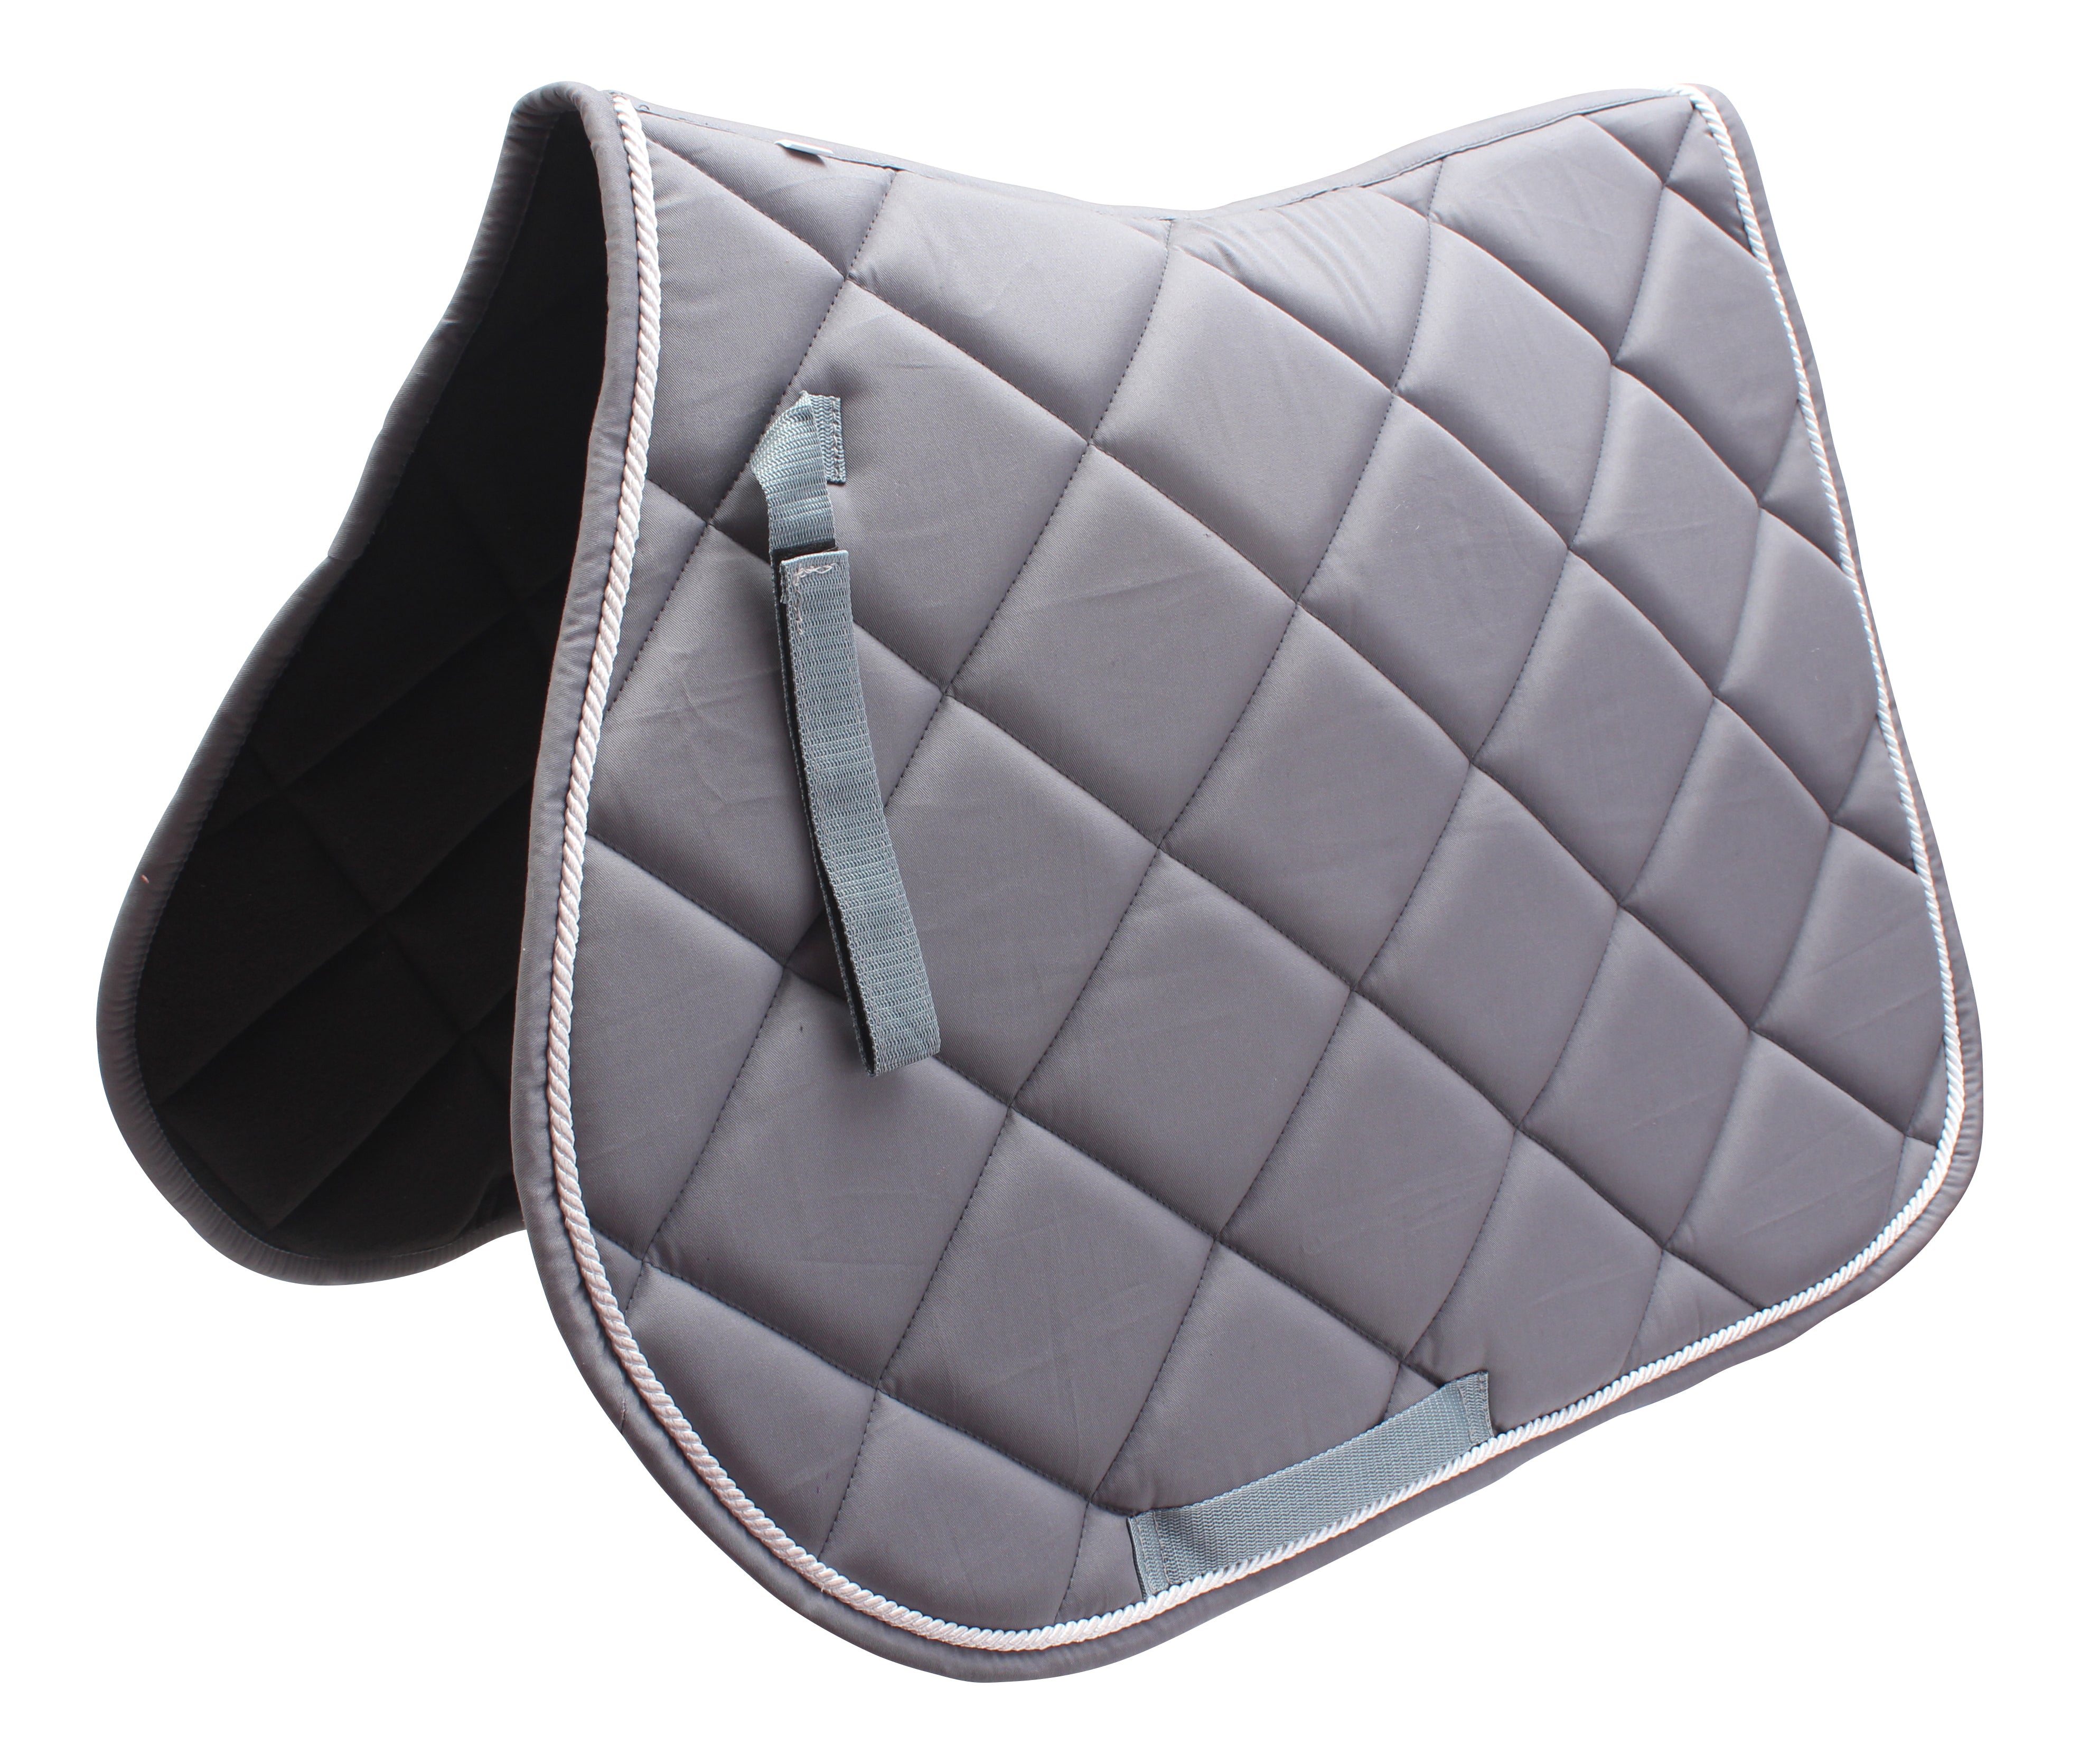 Full Horse/Cob Quilted Saddle Pad - Grey